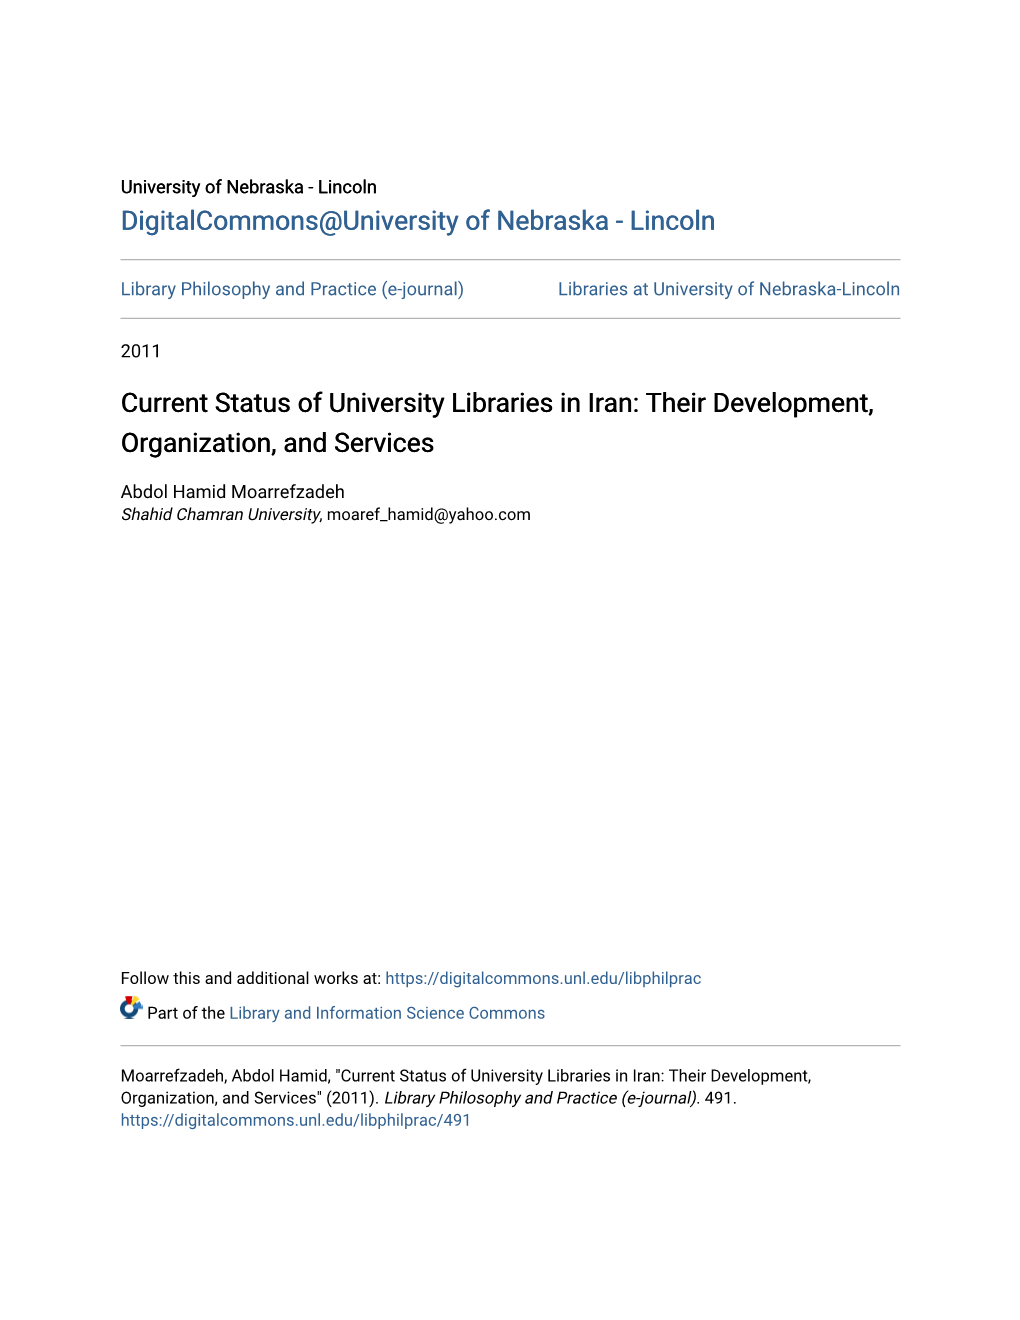 Current Status of University Libraries in Iran: Their Development, Organization, and Services